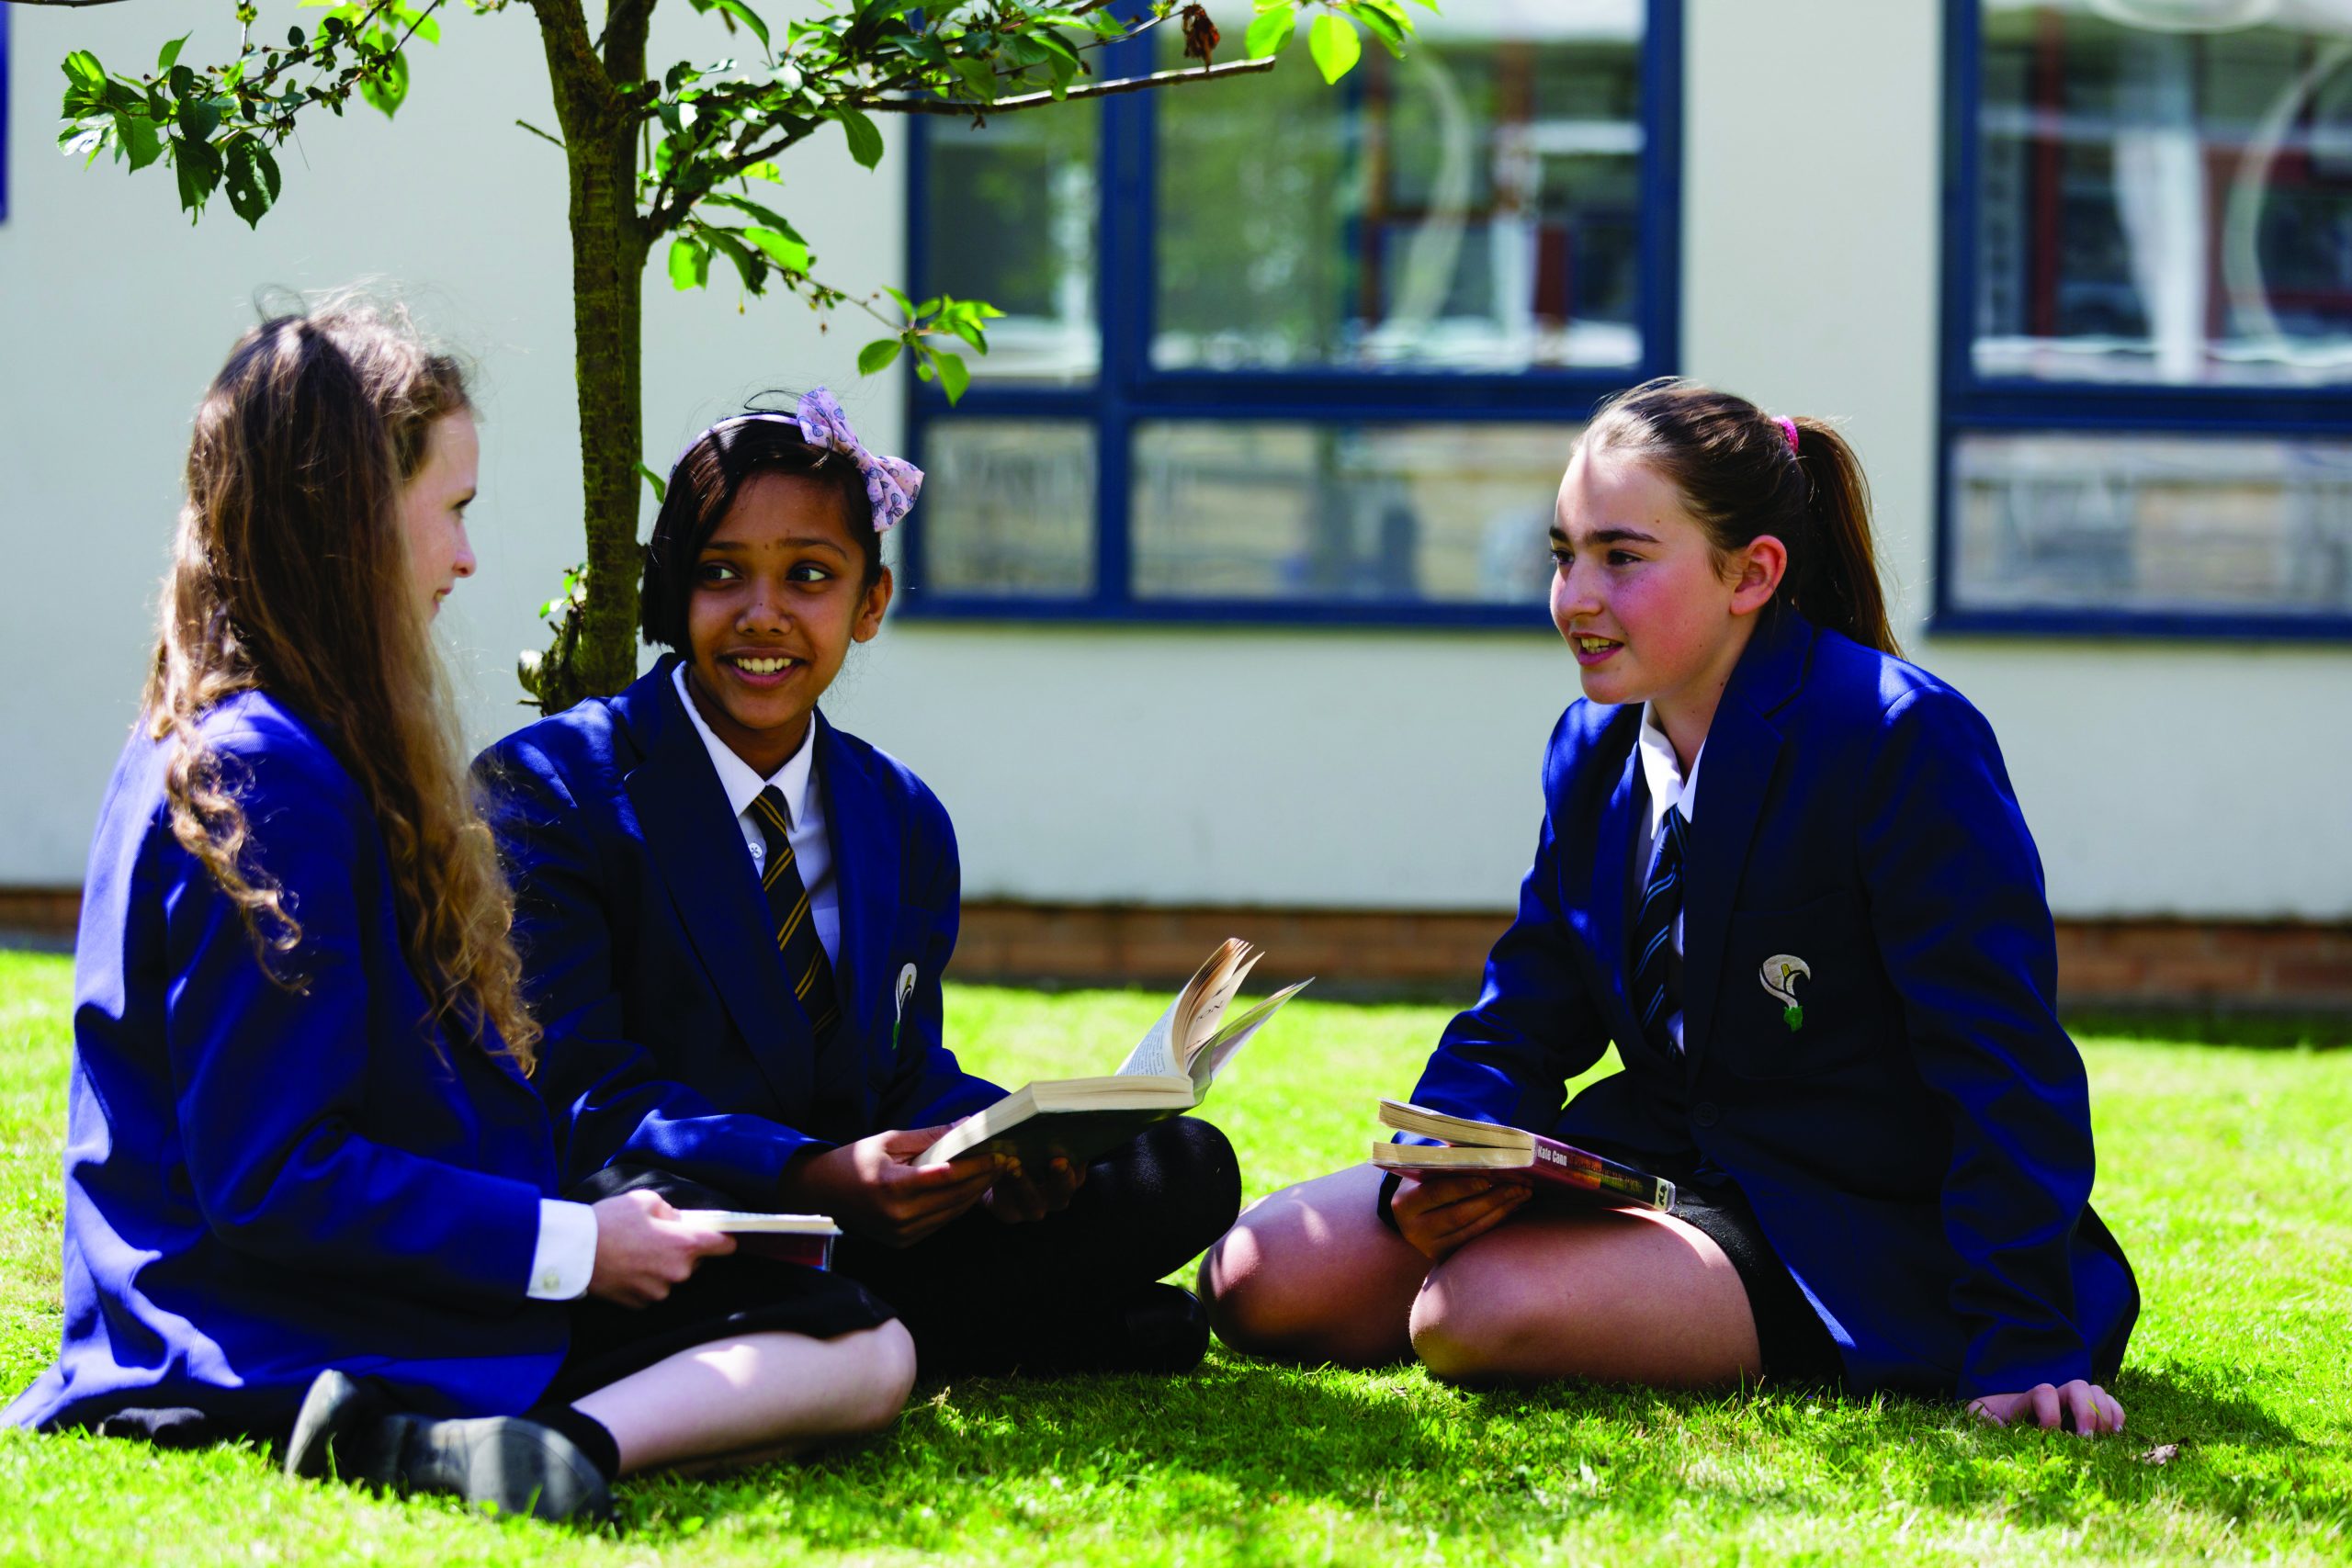 3 girls in school uniform, sitting on the grass, looking at each other and smiling